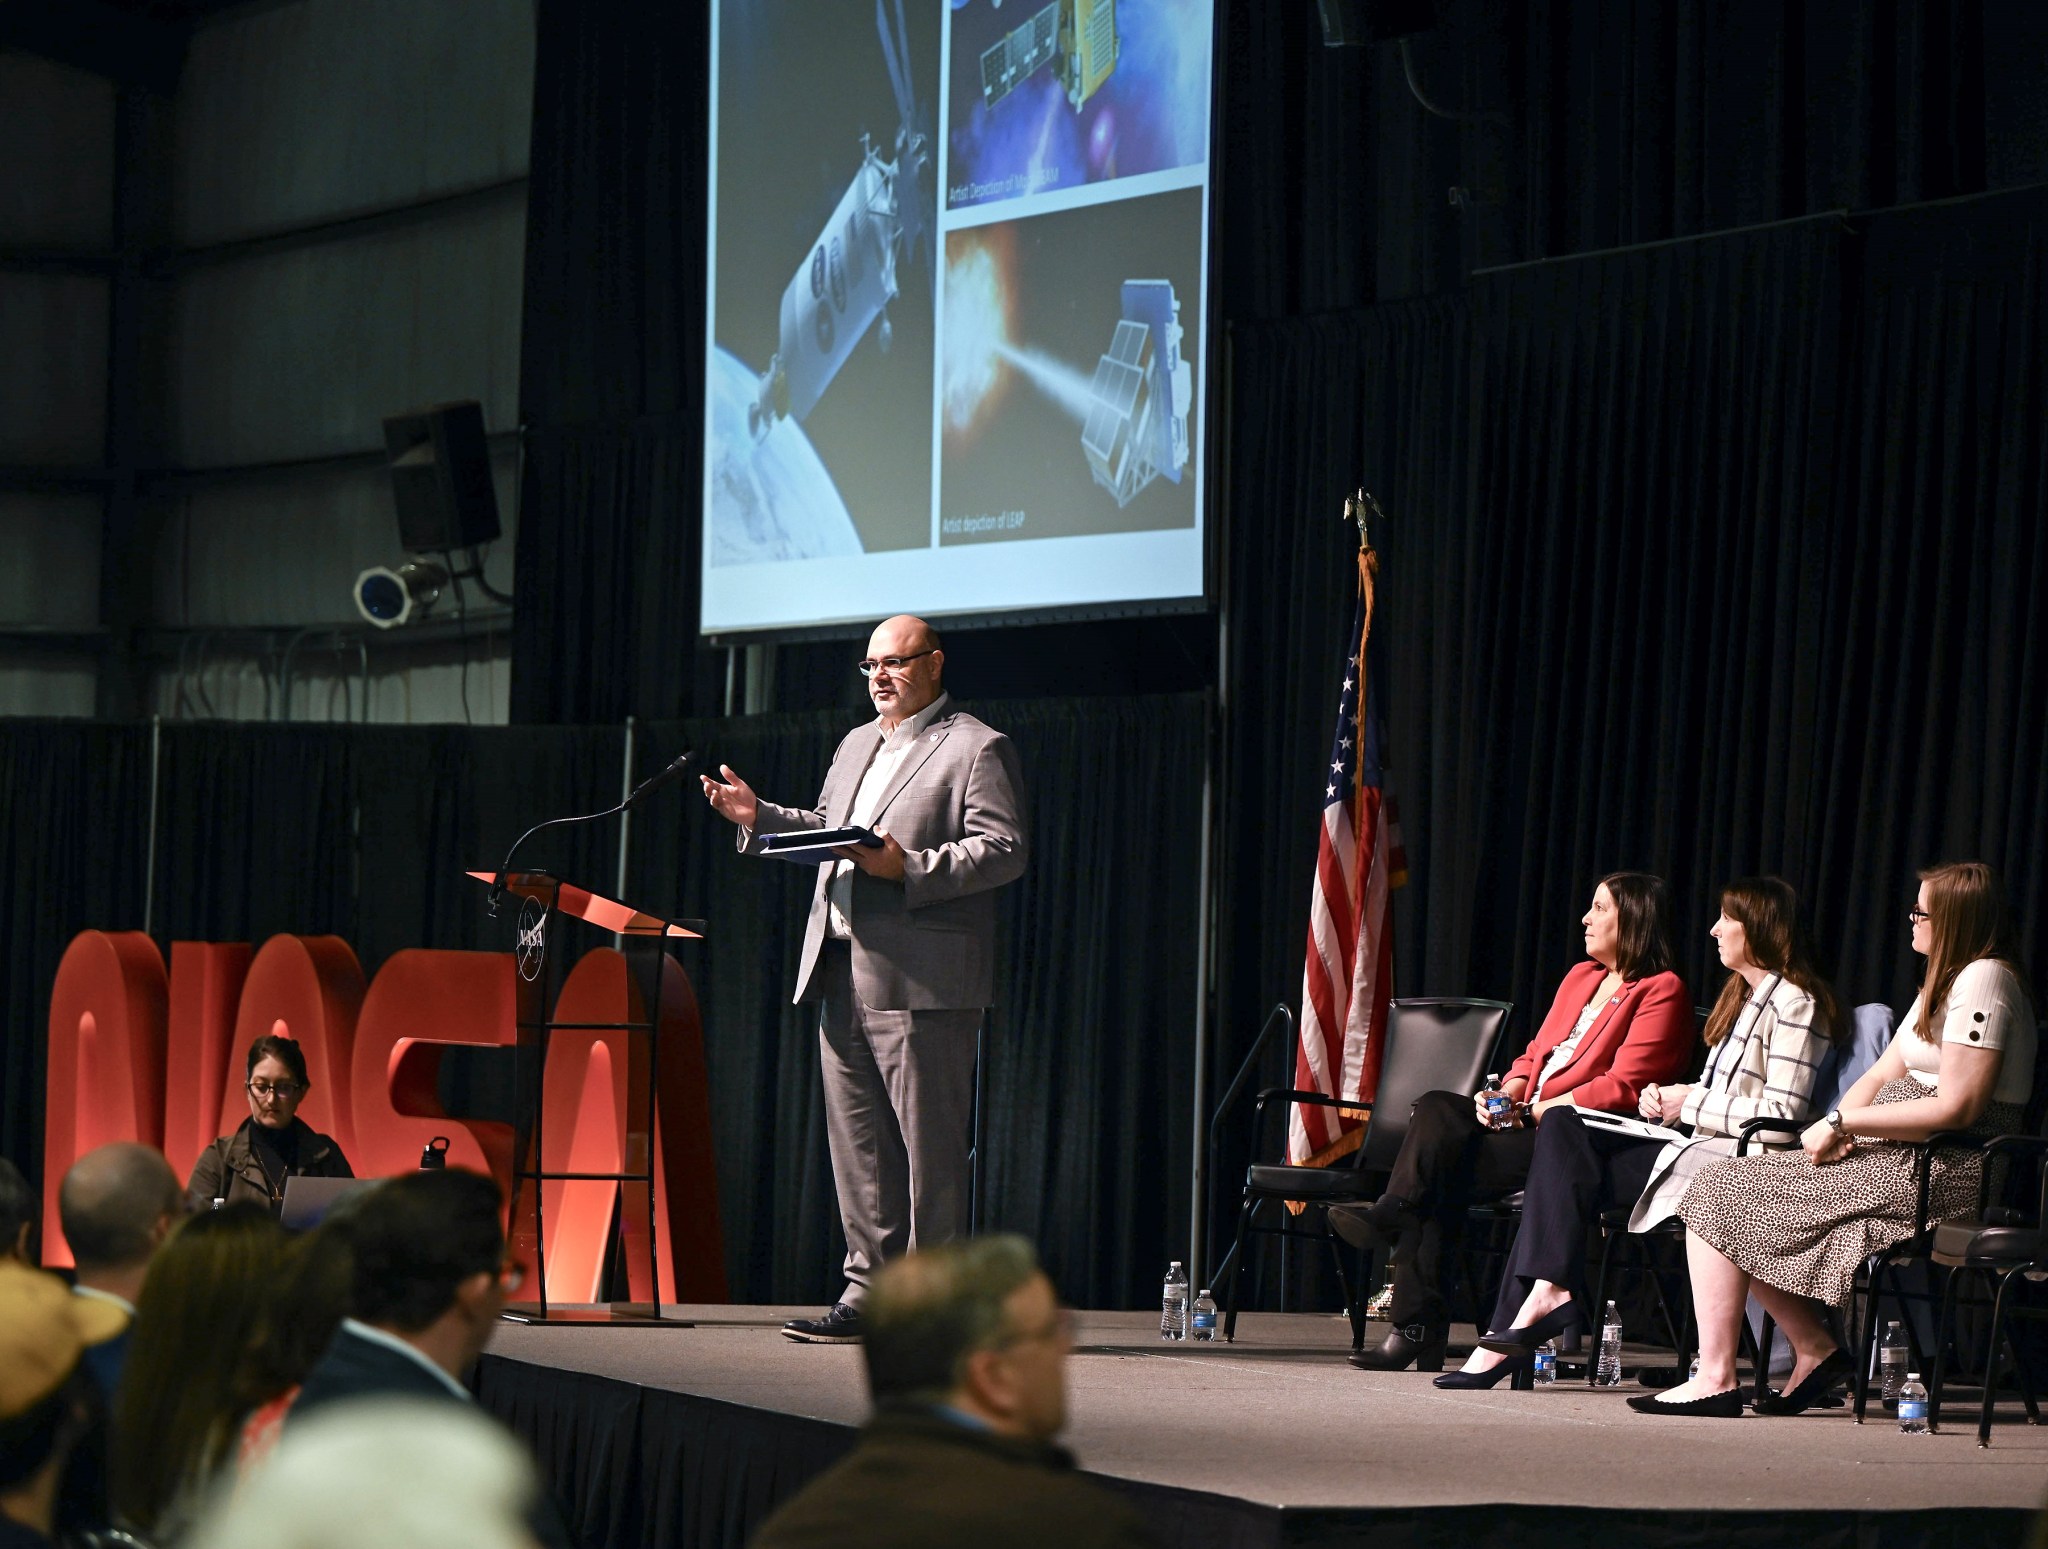 NASA Marshall Space Flight Center Director Joseph Pelfrey, standing, discusses the direction of Marshall and the center's upcoming projects and strategies during the first all-hands meeting of 2024. Joining him on stage, from left, are Tia Ferguson, Marshall's Space Systems Department director in the Engineering Directorate, Associate Center Director Rae Ann Meyer, and Mallory James, an aerospace engineer and management assistant in the office of the center director.